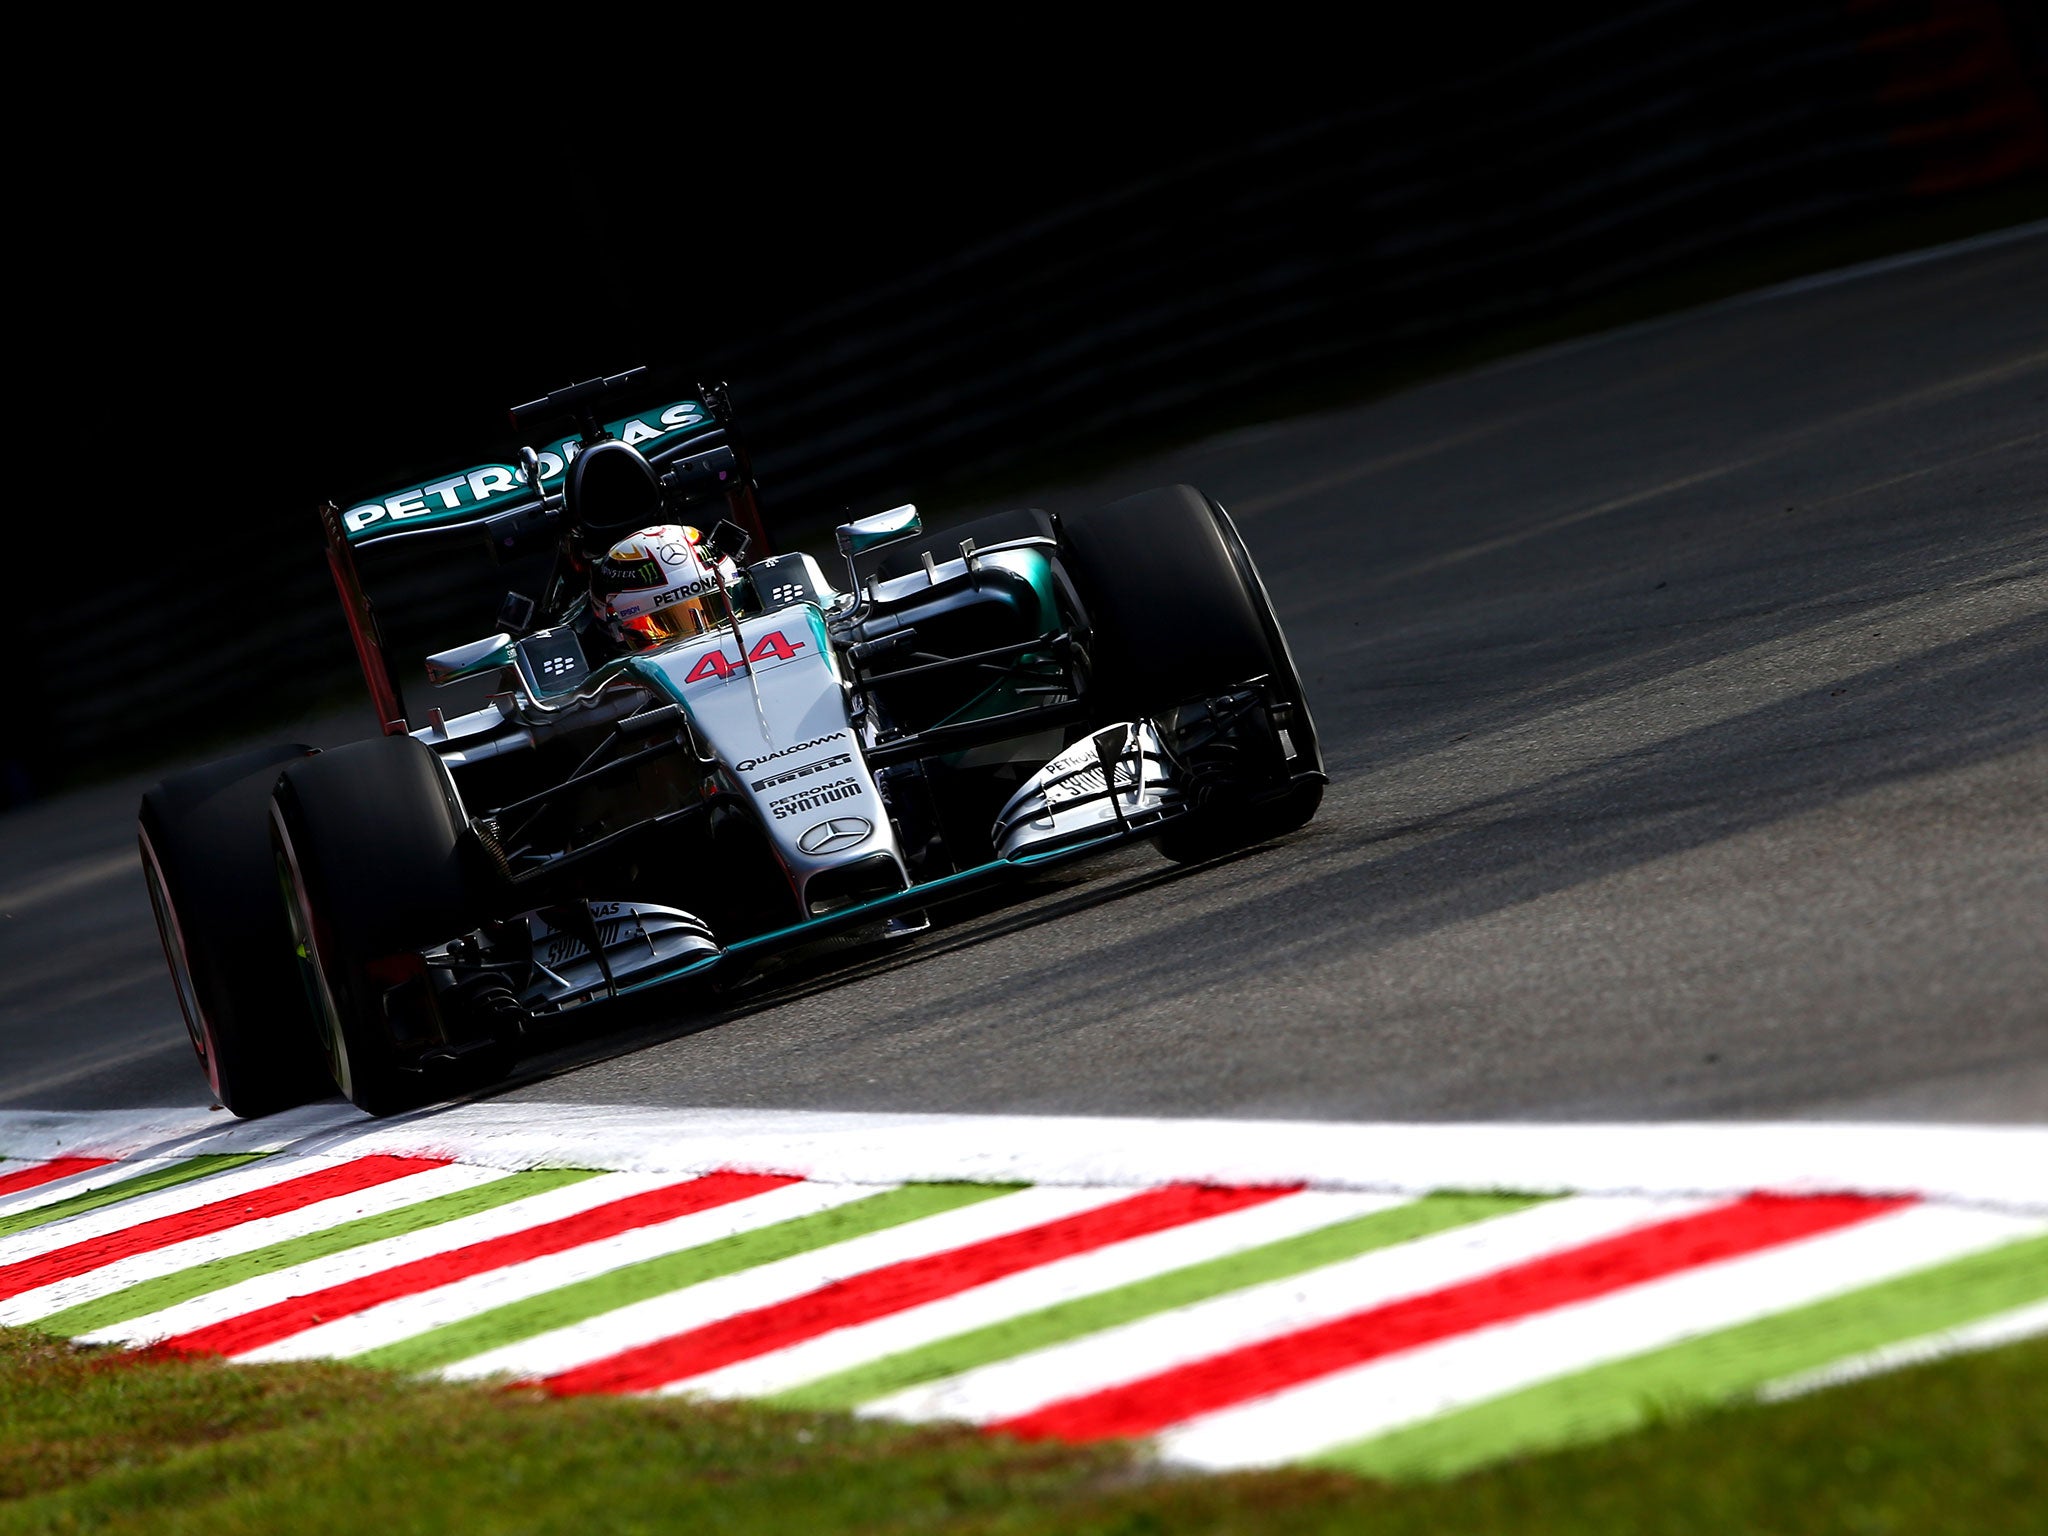 Lewis Hamilton finished both practice sessions fastest